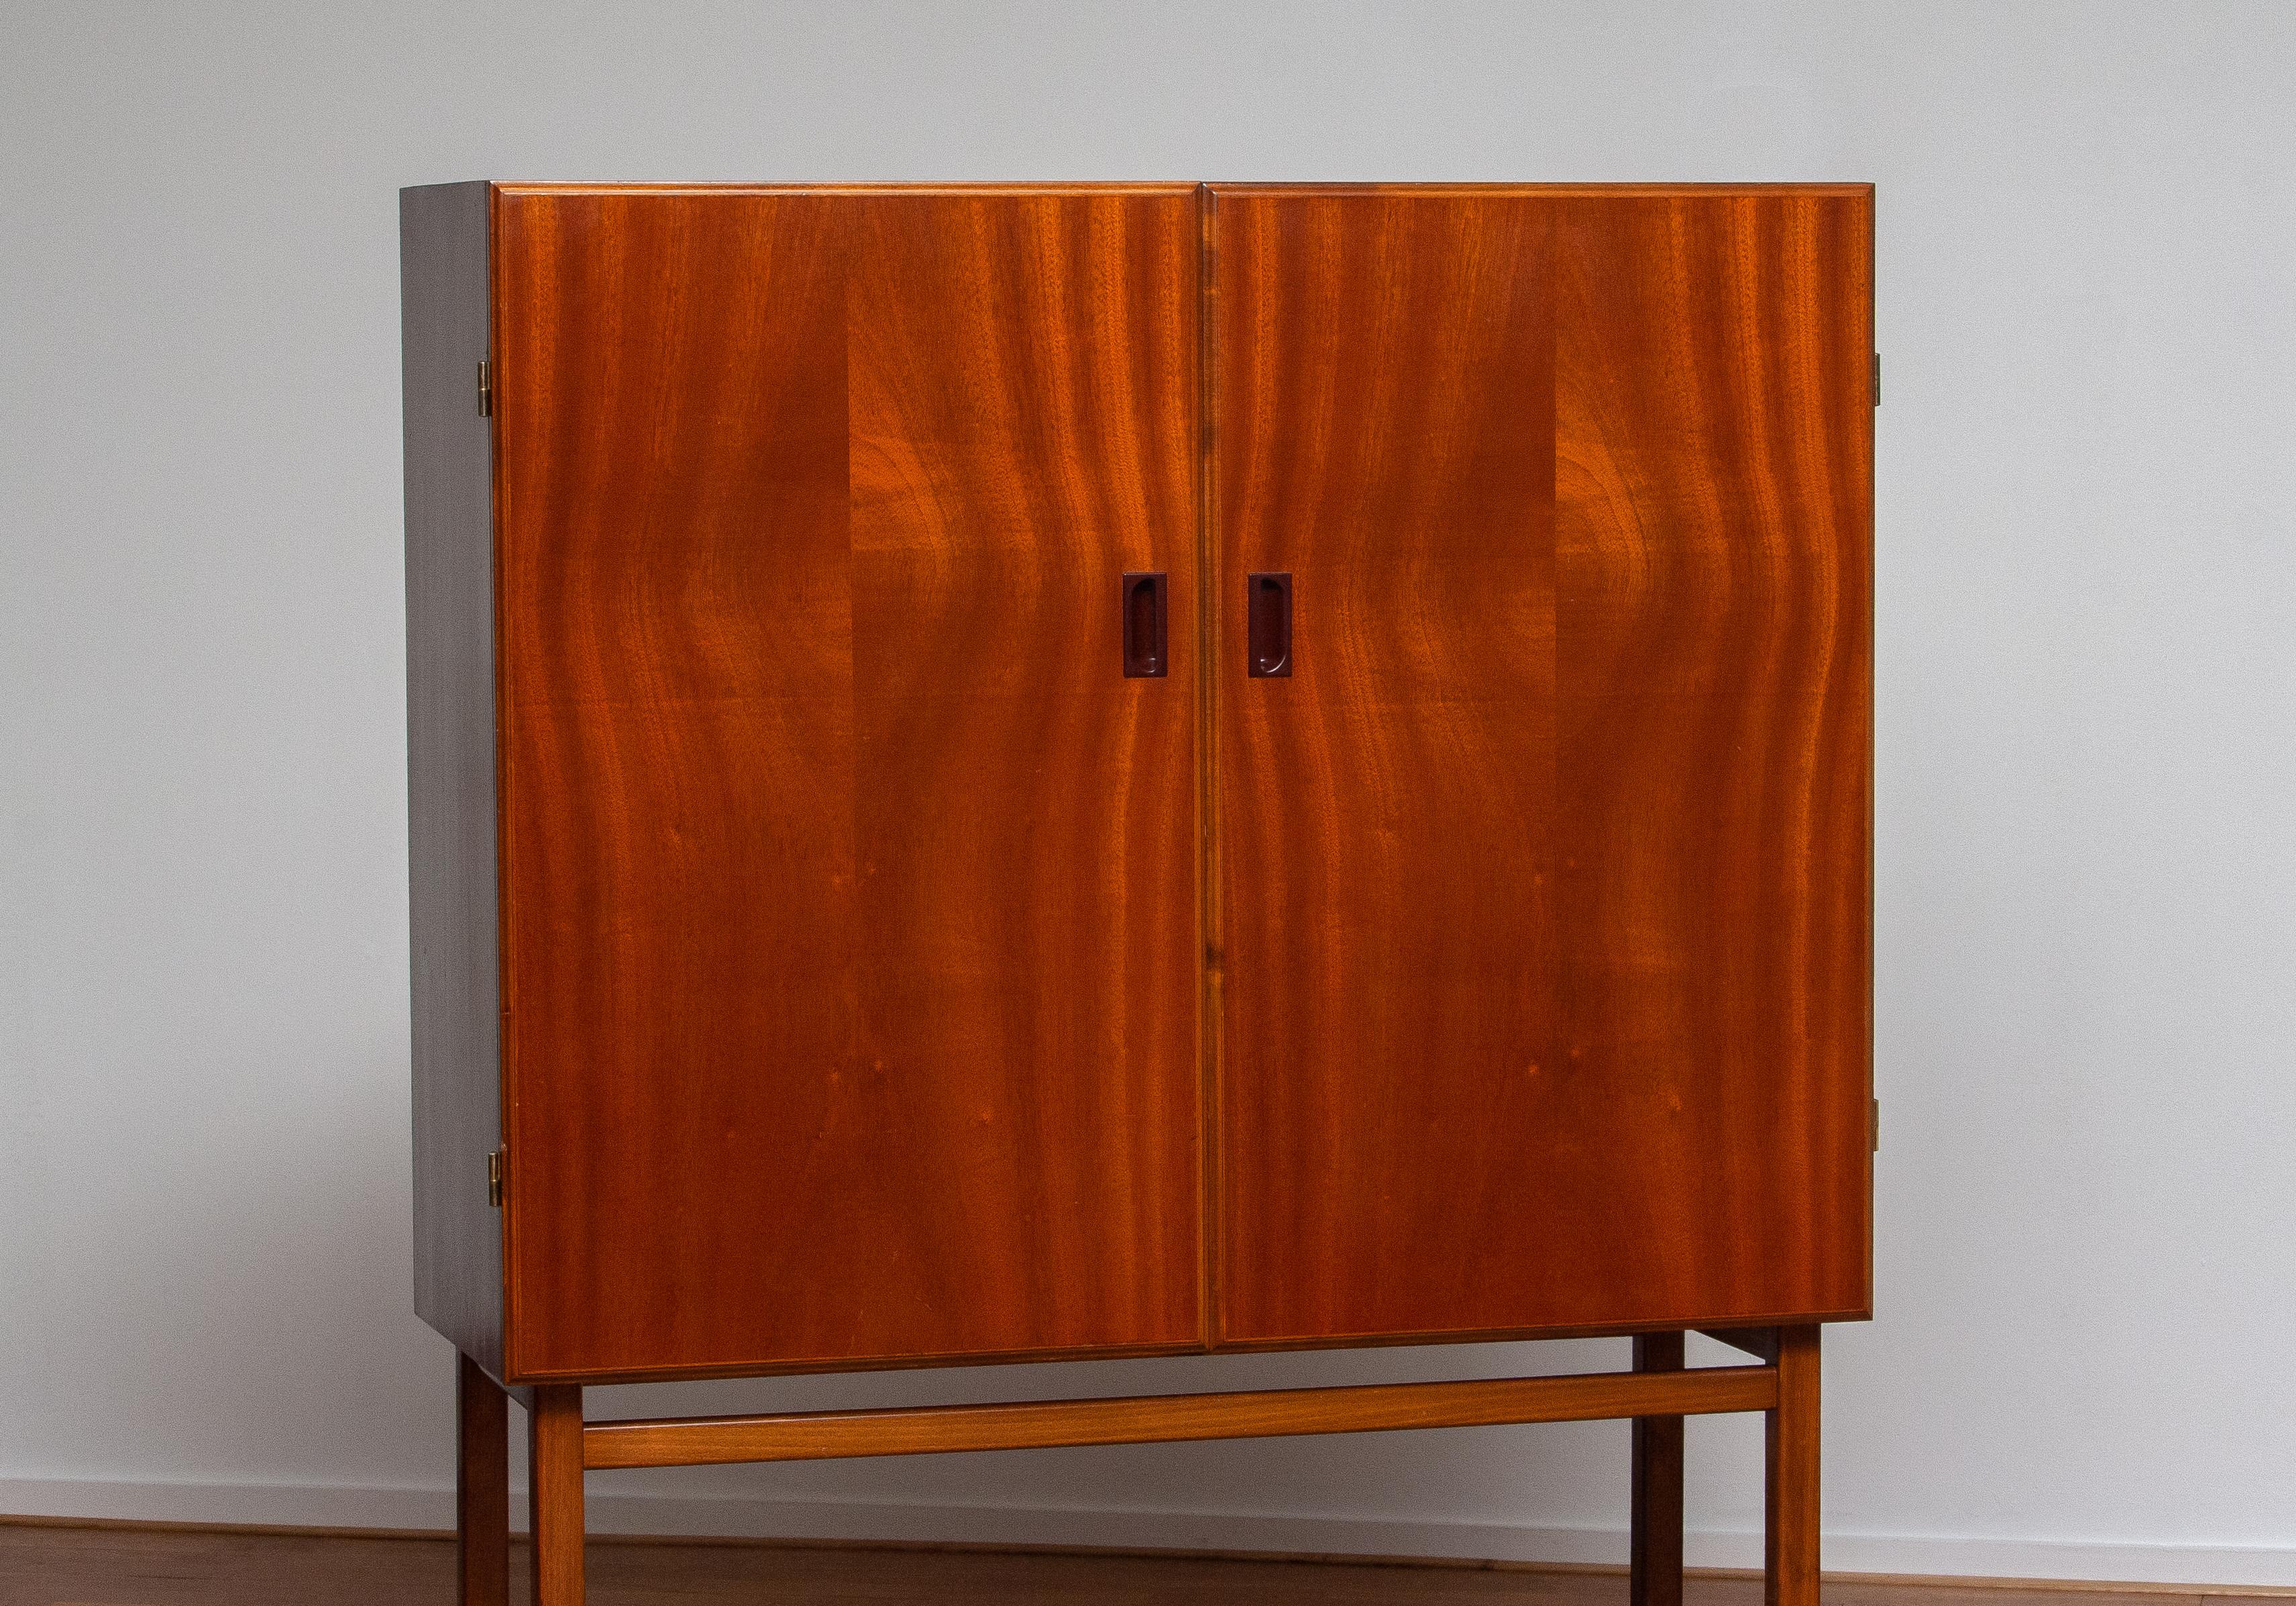 1950s, Slim Midcentury Mahogany Dry Bar or Cabinet by Forenades Mobler, Sweden 2